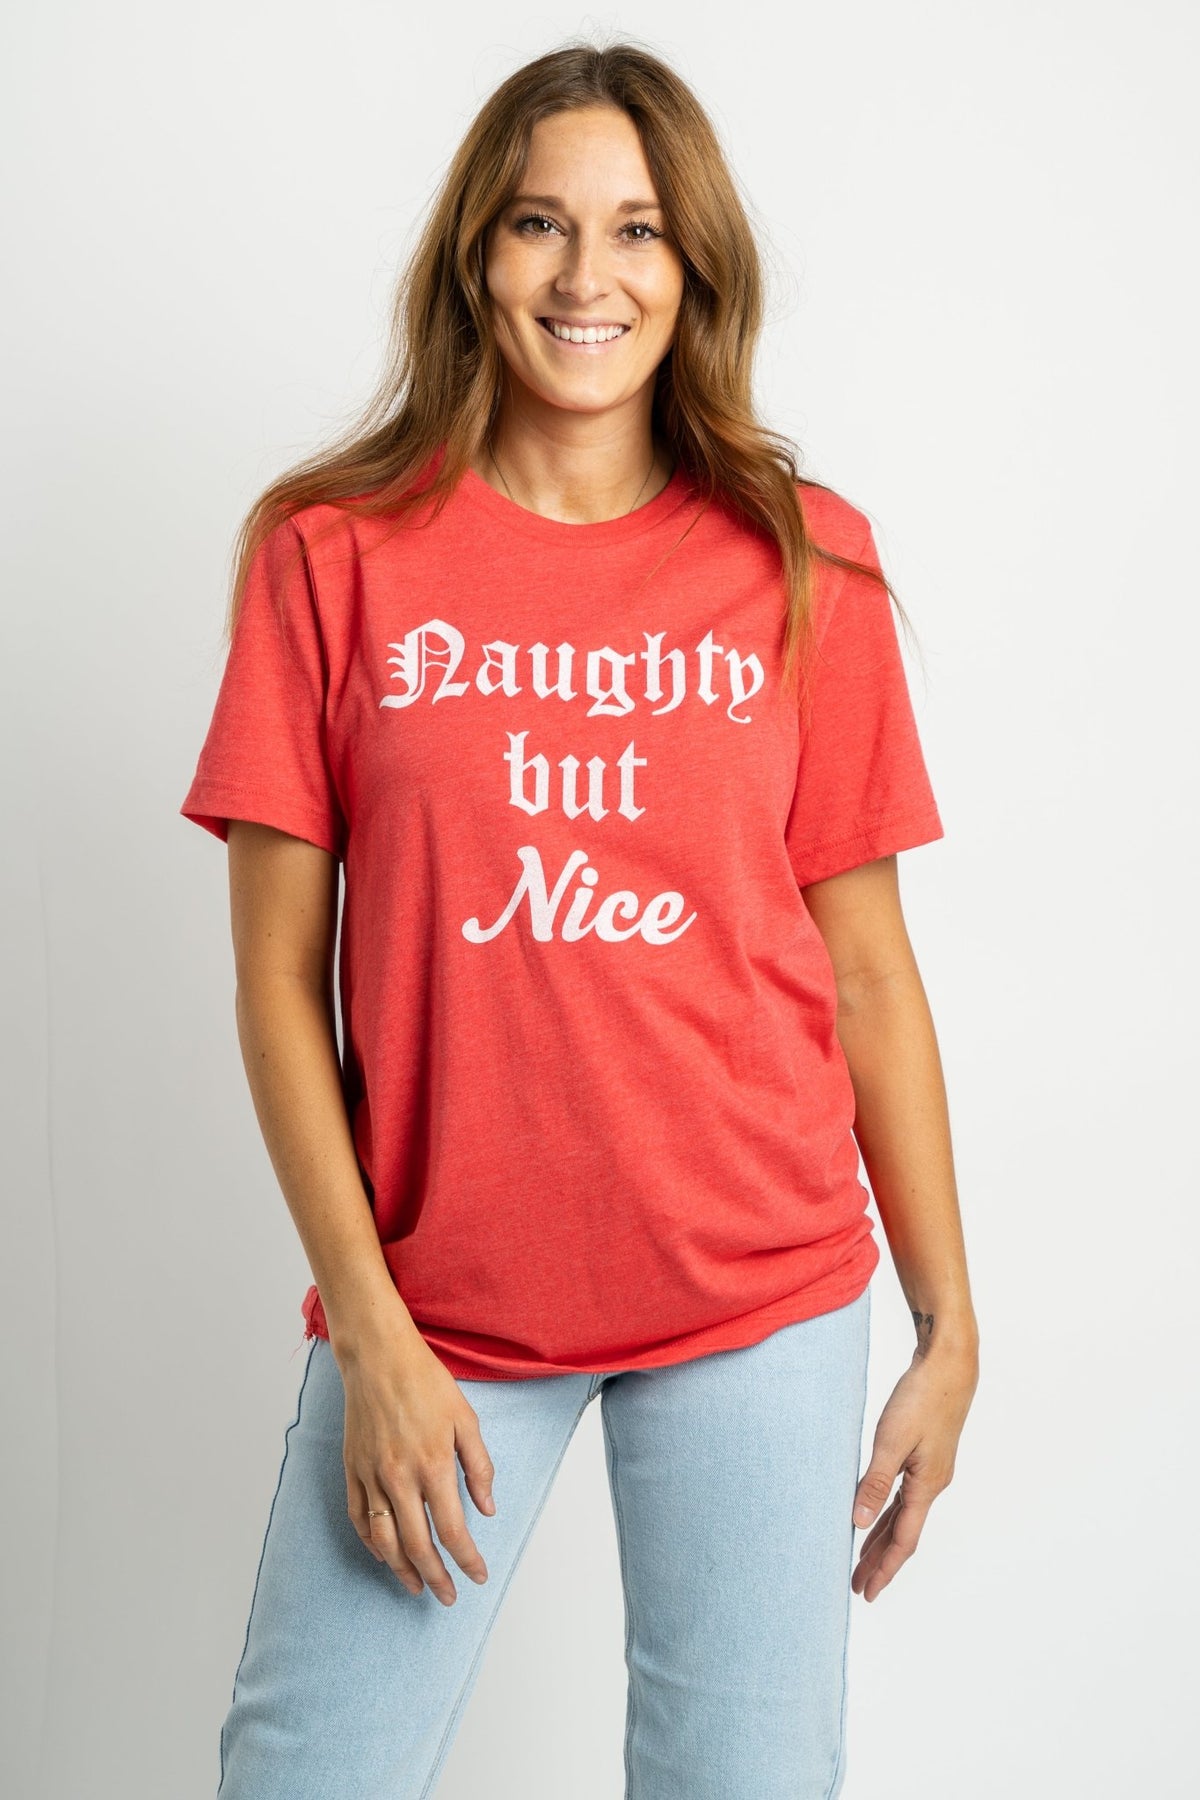 Naughty but Nice unisex short sleeve t-shirt red - Cute T-shirts - Trendy Graphic T-Shirts at Lush Fashion Lounge Boutique in Oklahoma City